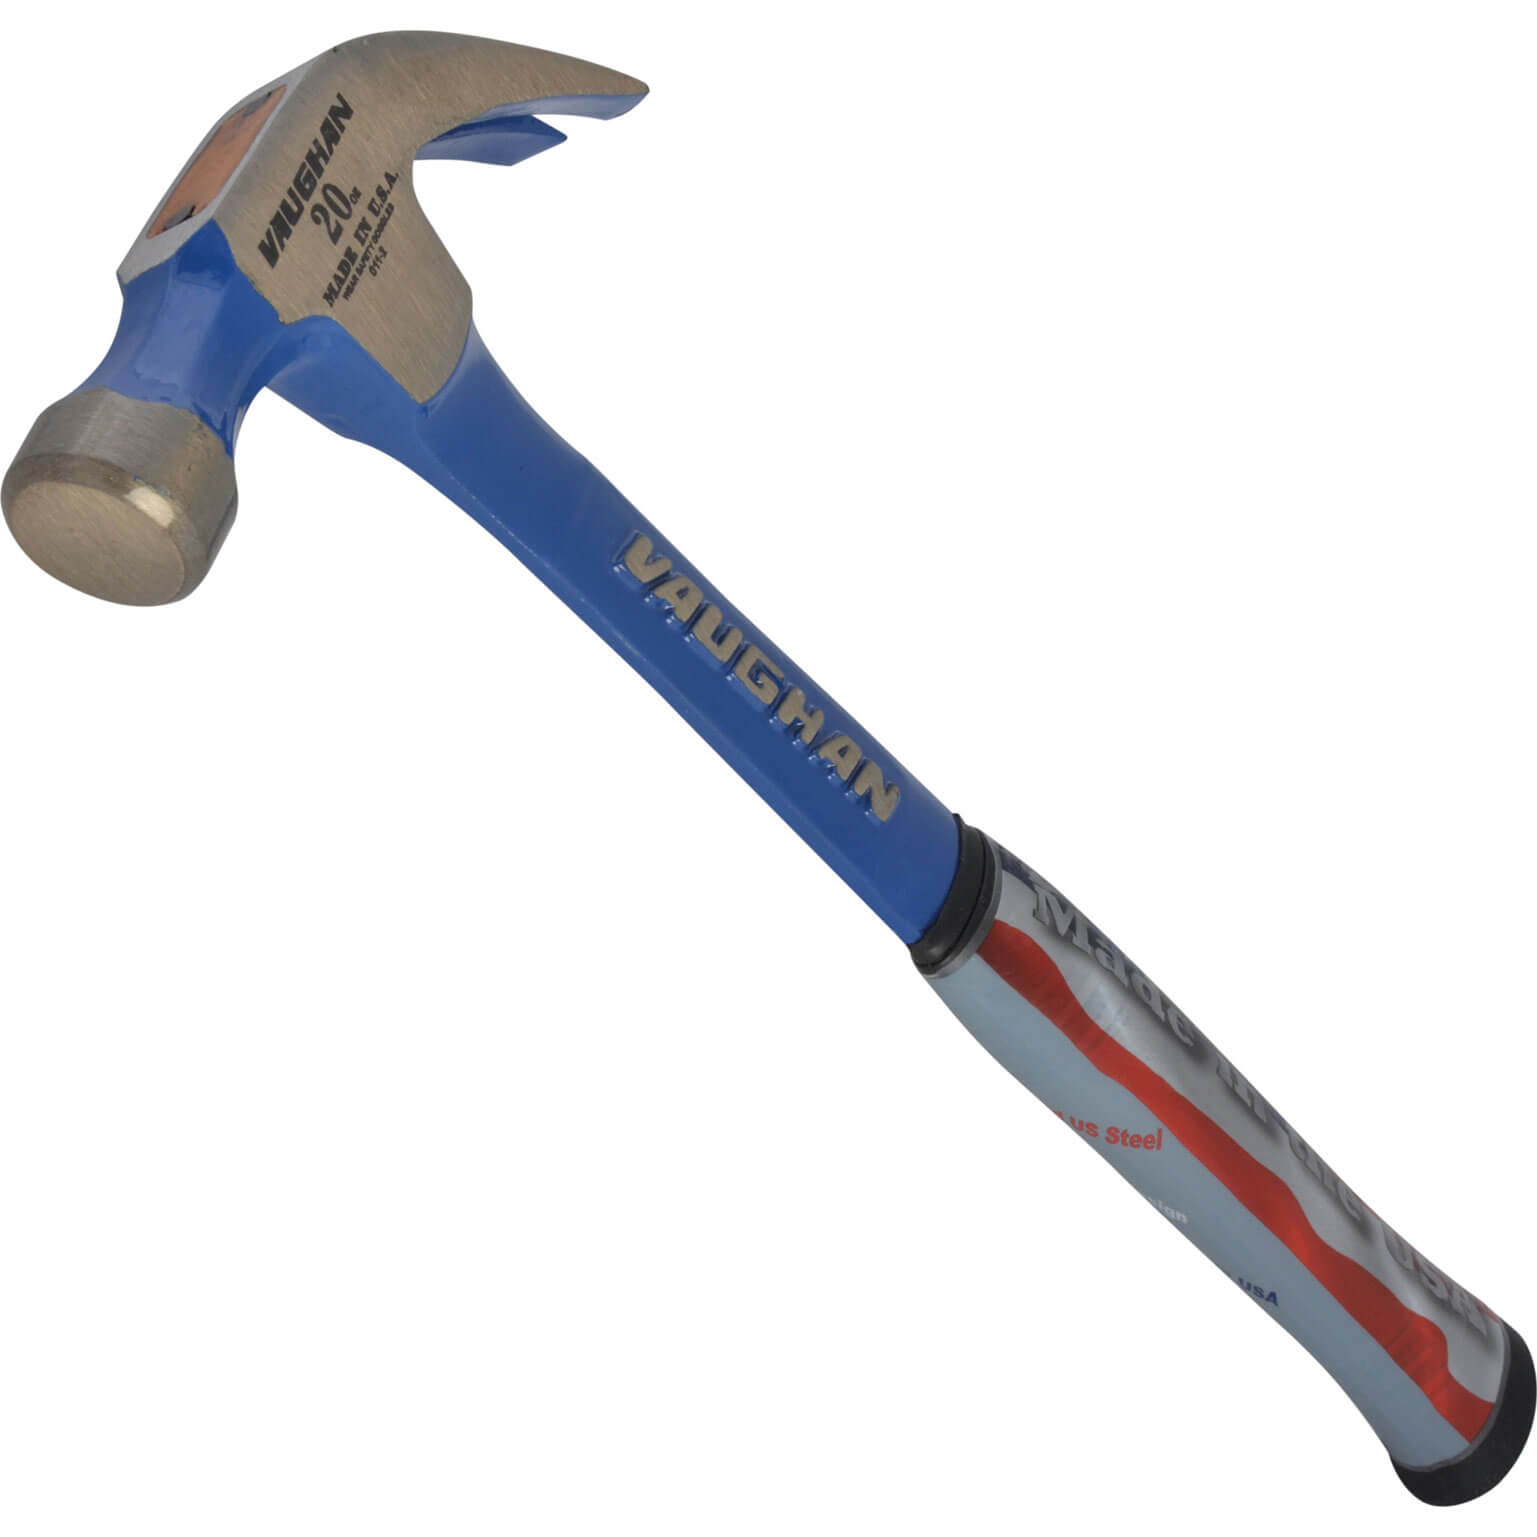 Image of Vaughan Curved Claw Nail Hammer Smooth Face 560g